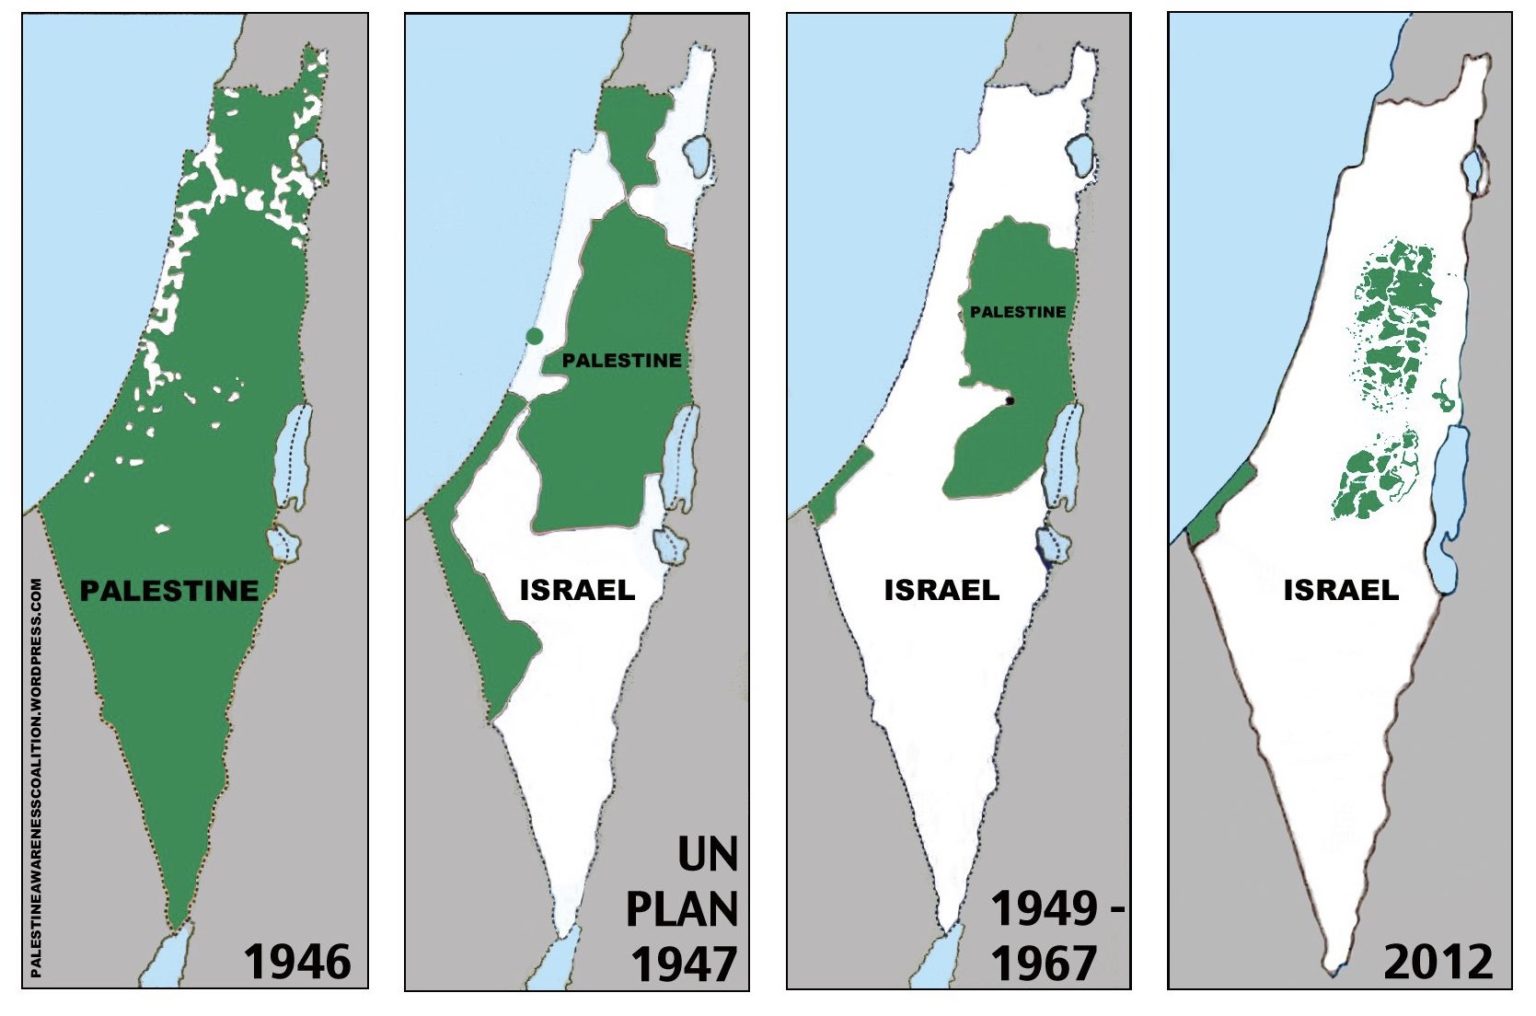 “Disappearing Palestine” - the Maps that Lie - AIJAC